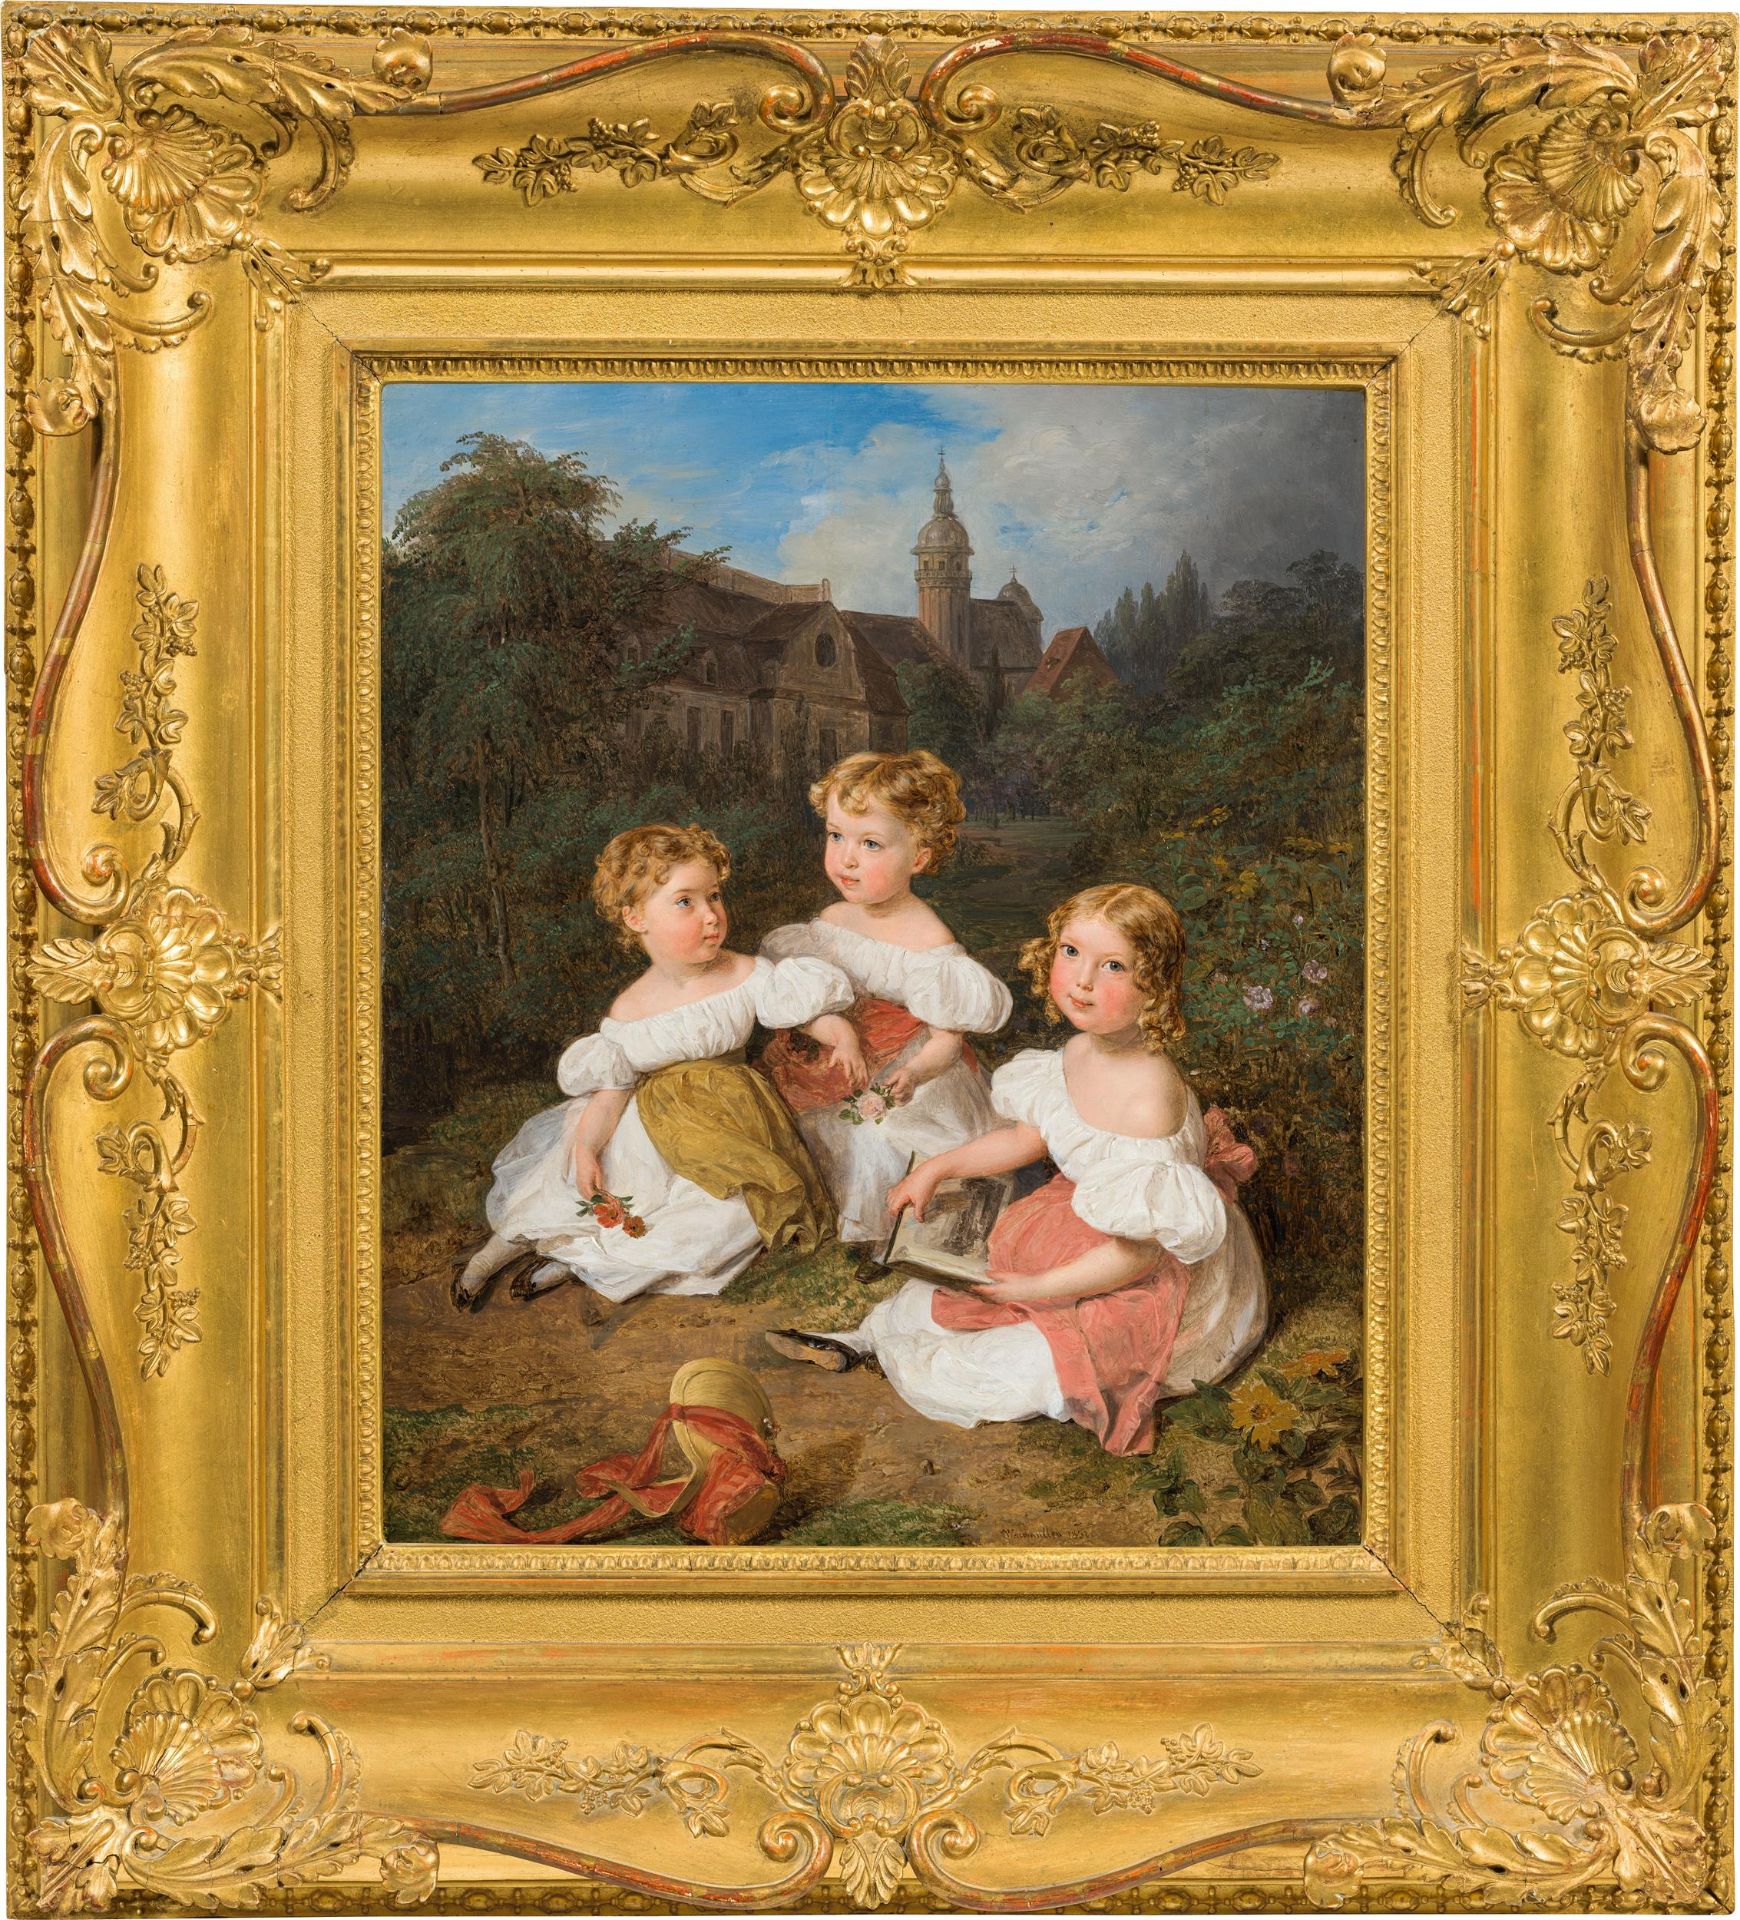 Ferdinand Georg Waldmüller: Polixena, Hedwig and Zdenka, Princesses of Lobkowicz - Image 2 of 2